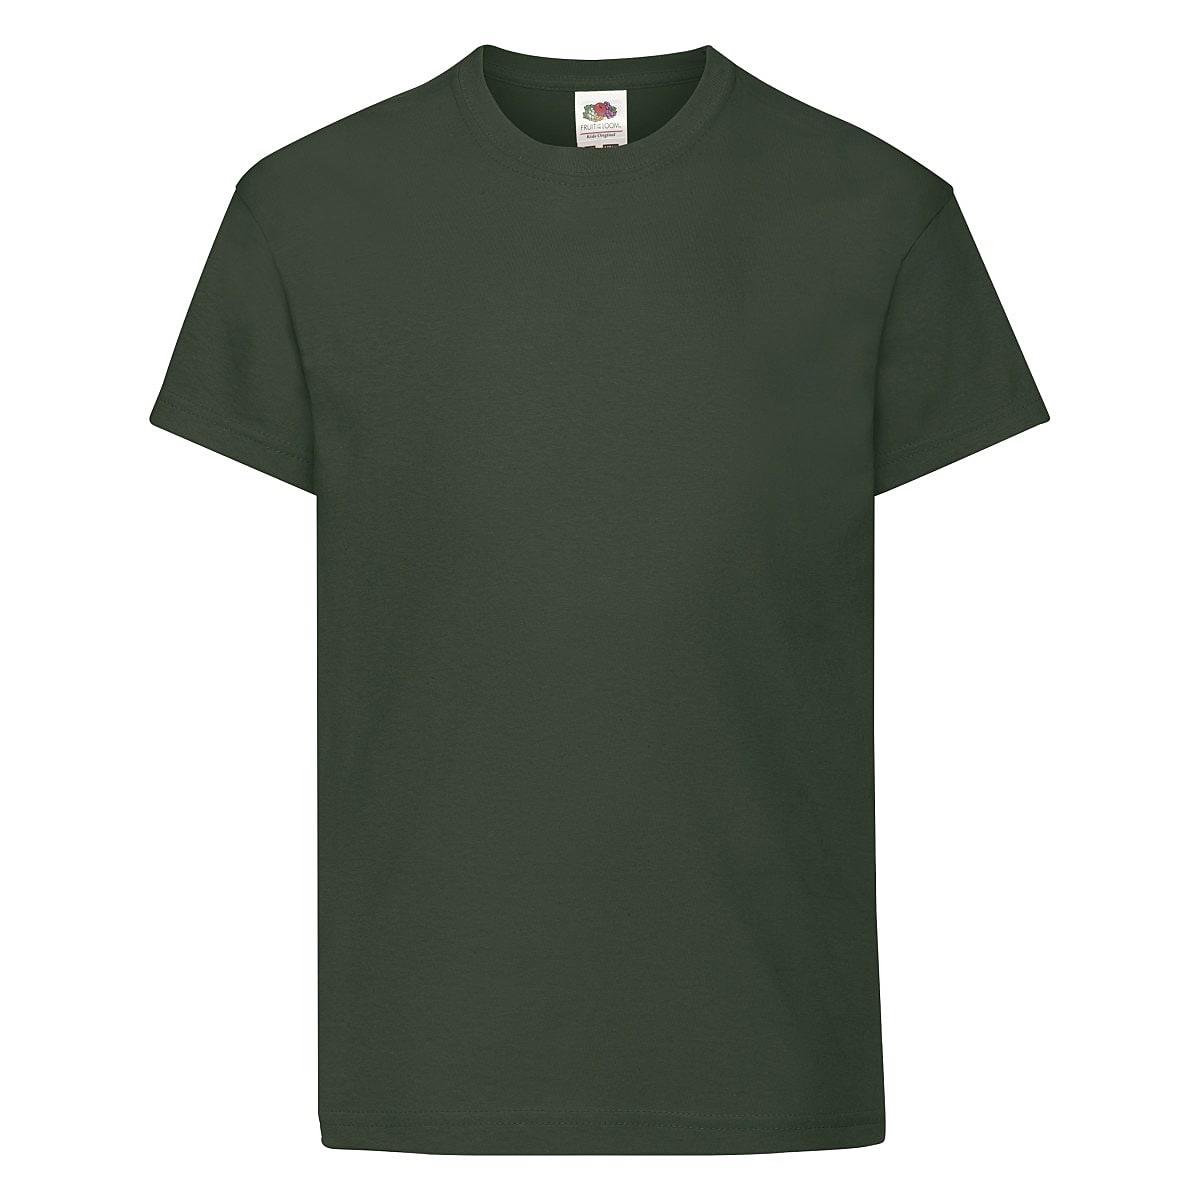 Fruit Of The Loom Kids Original T-Shirt in Bottle Green (Product Code: 61019)